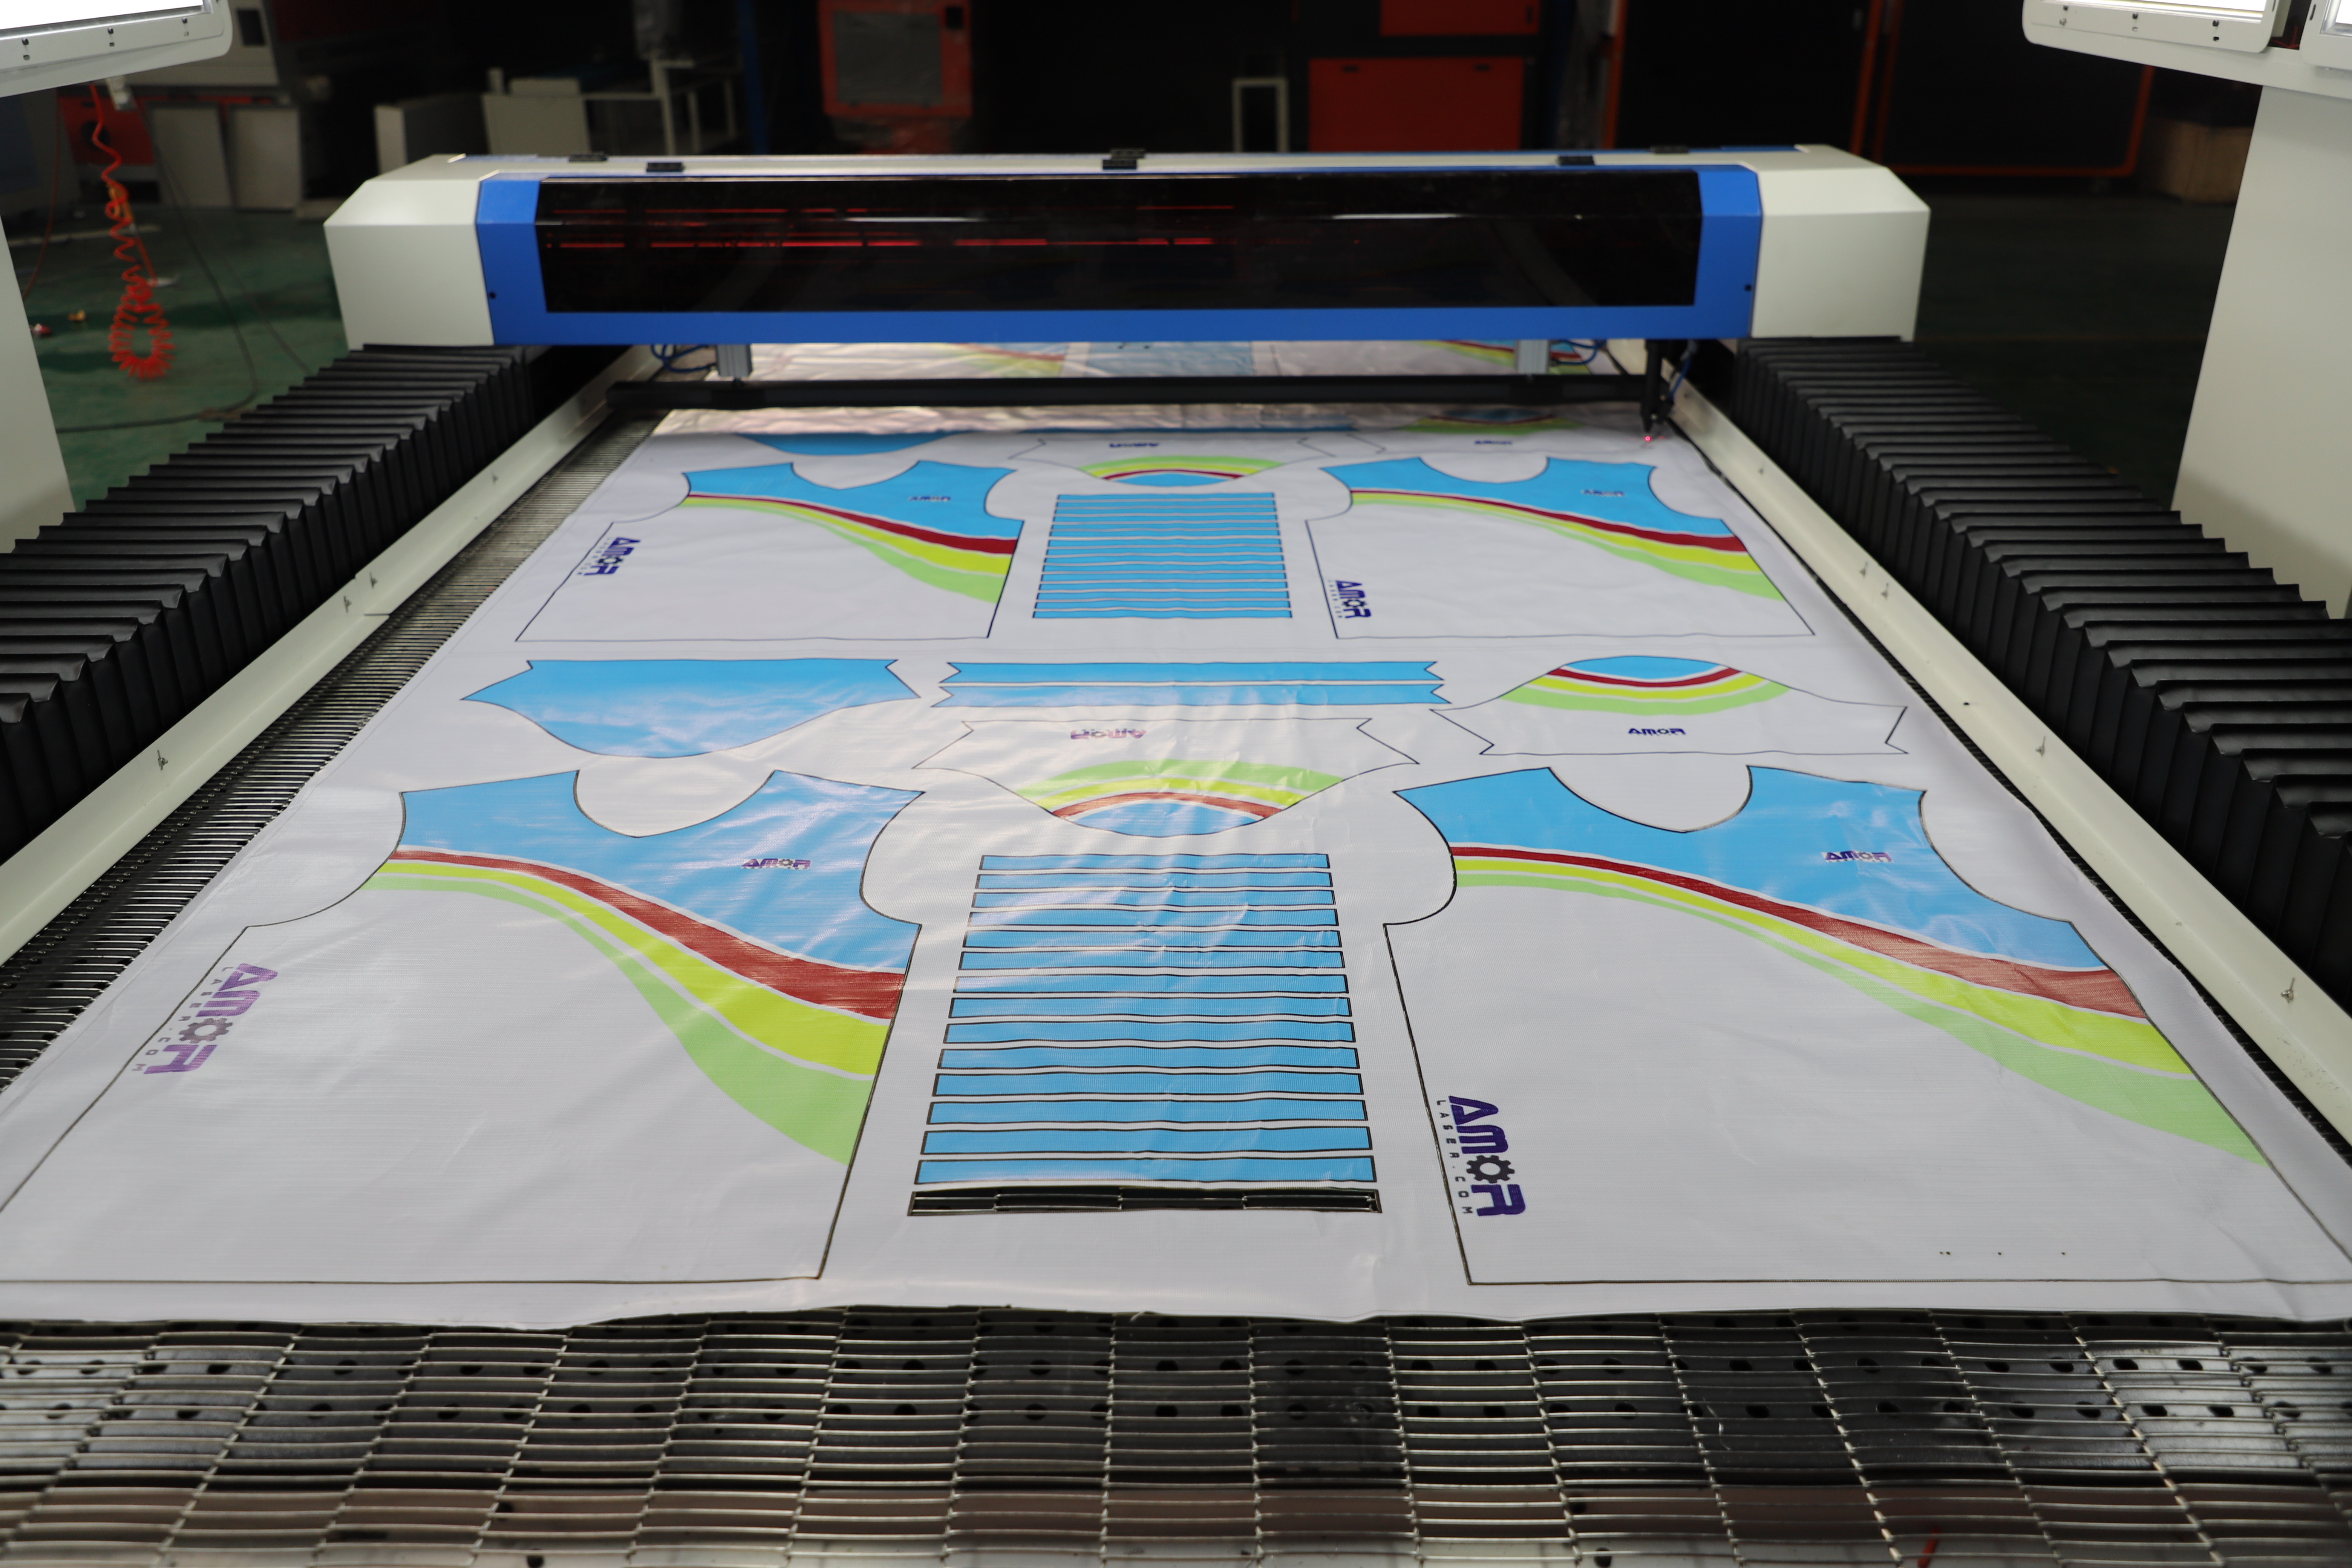 What are the key technologies of laser cutting machines?